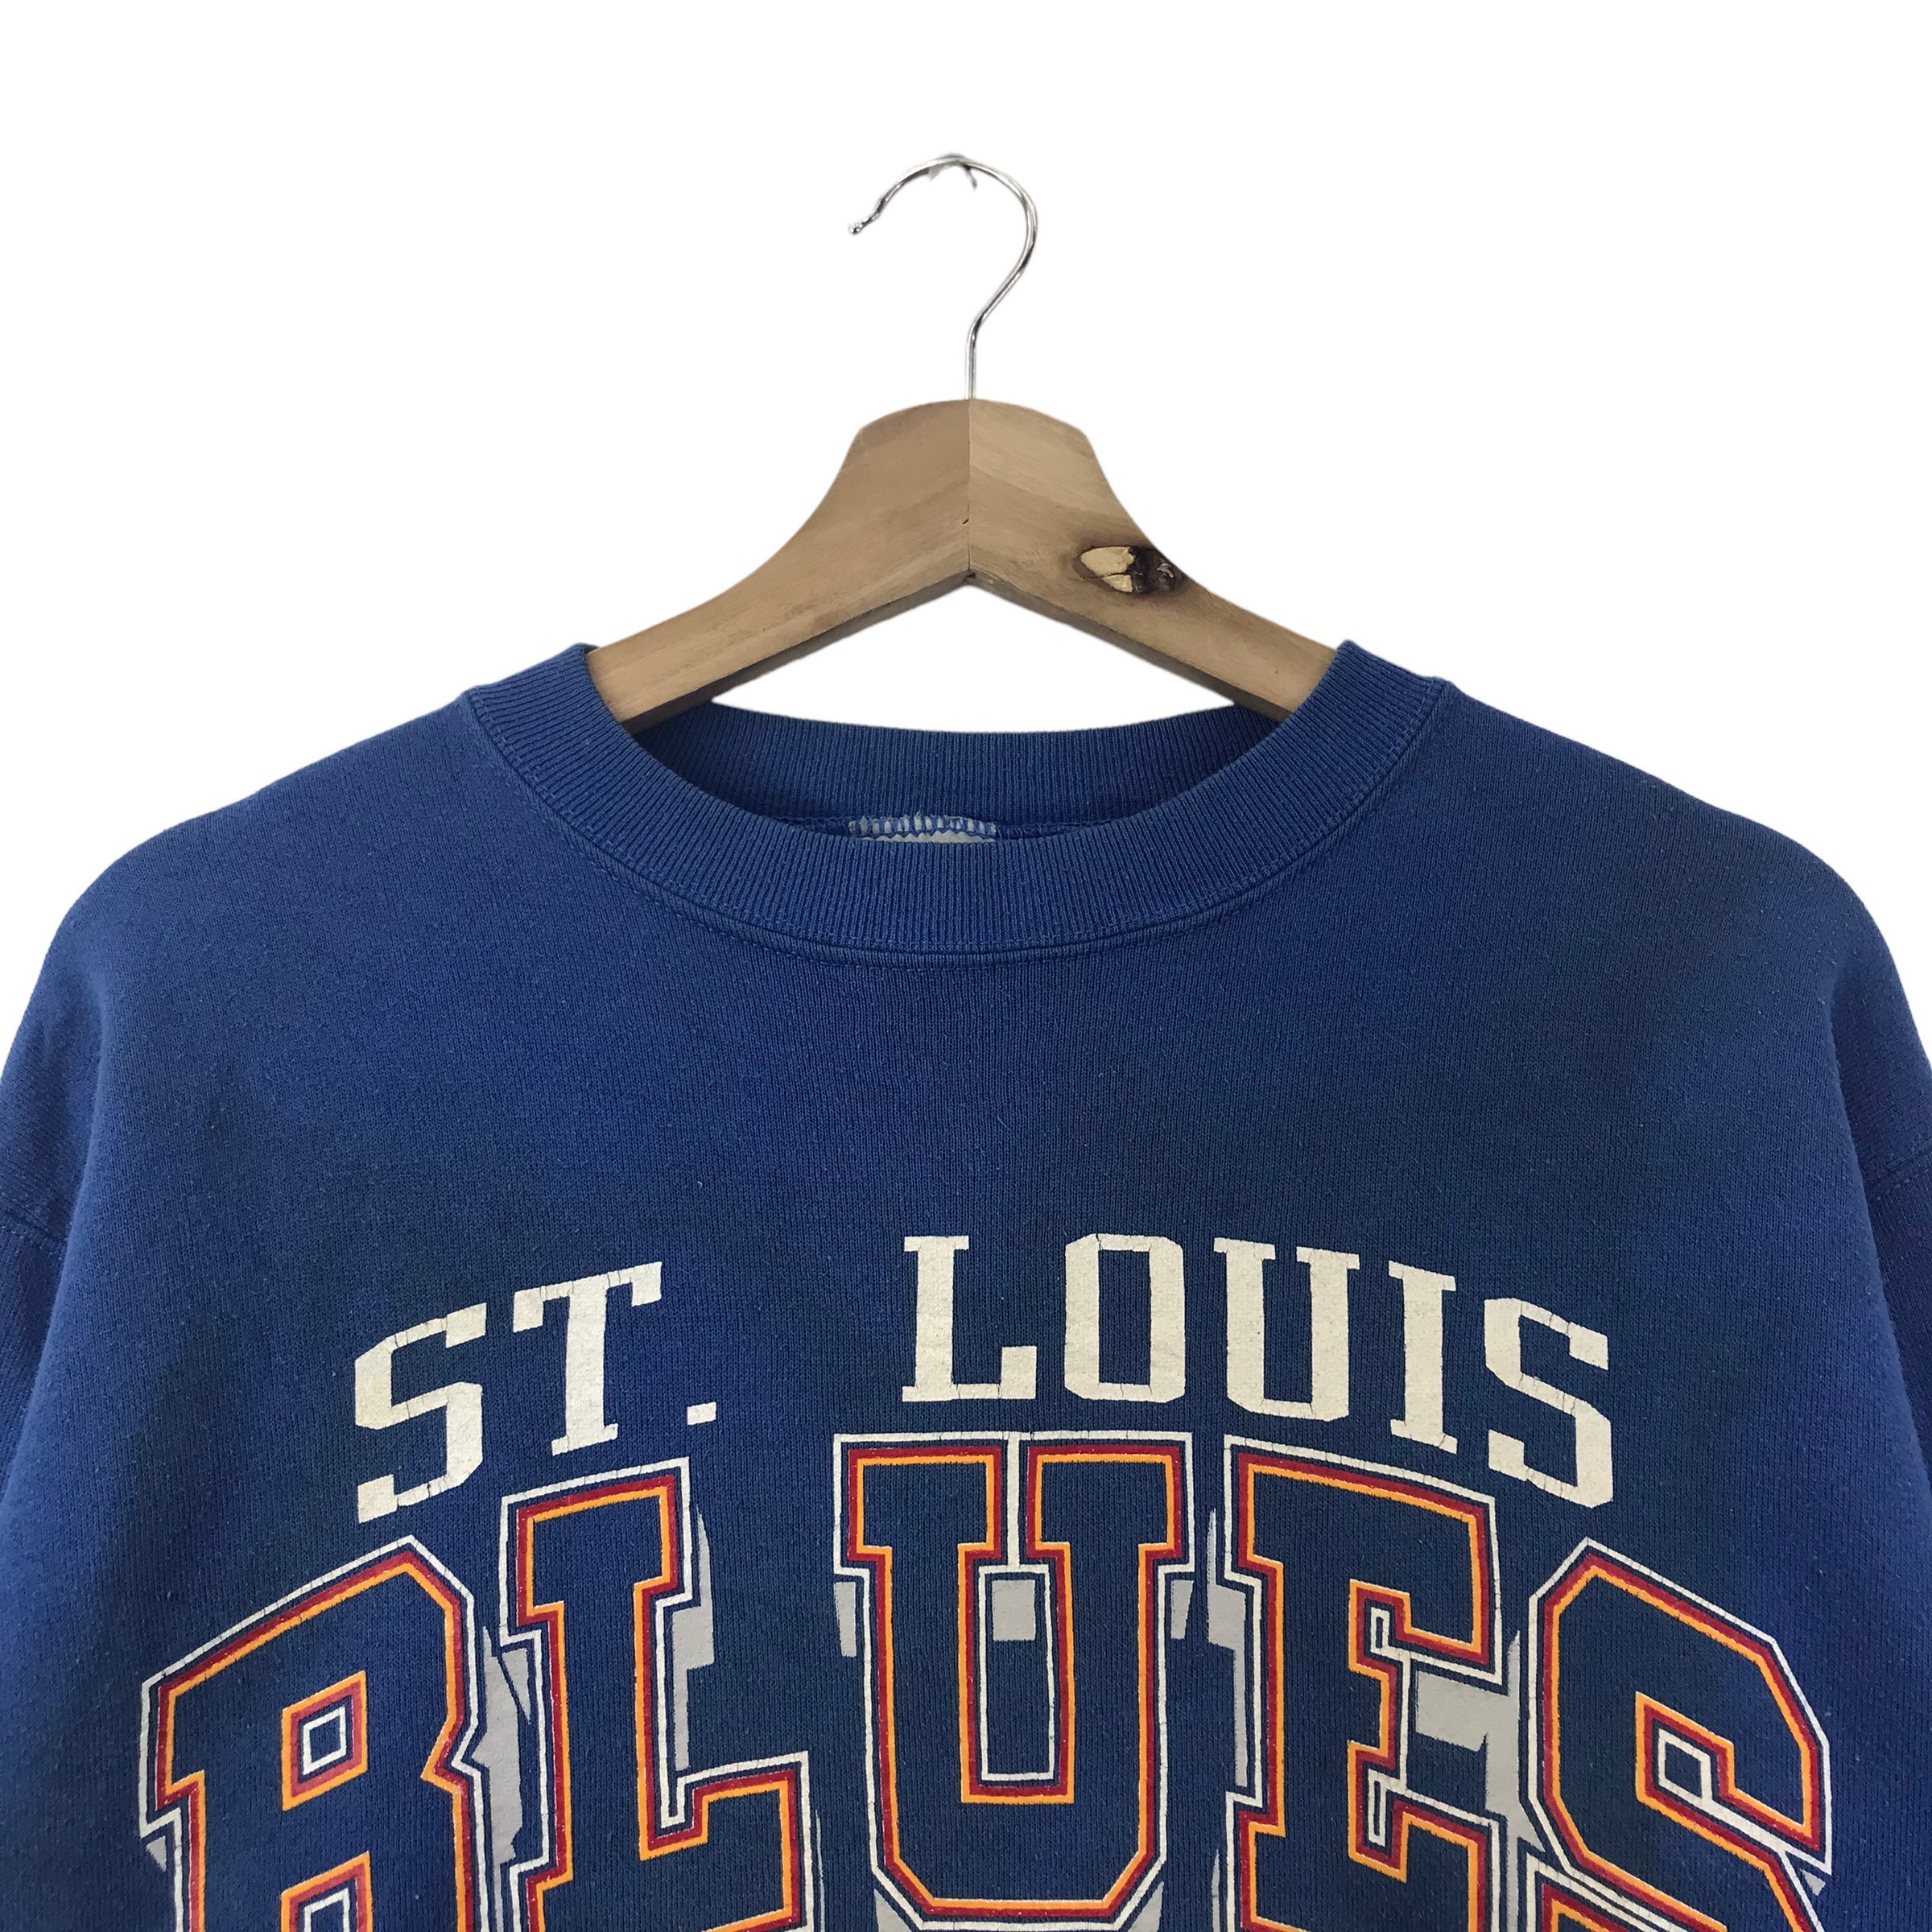 St. Louis Blues - Introducing the '90s Knit, designed by